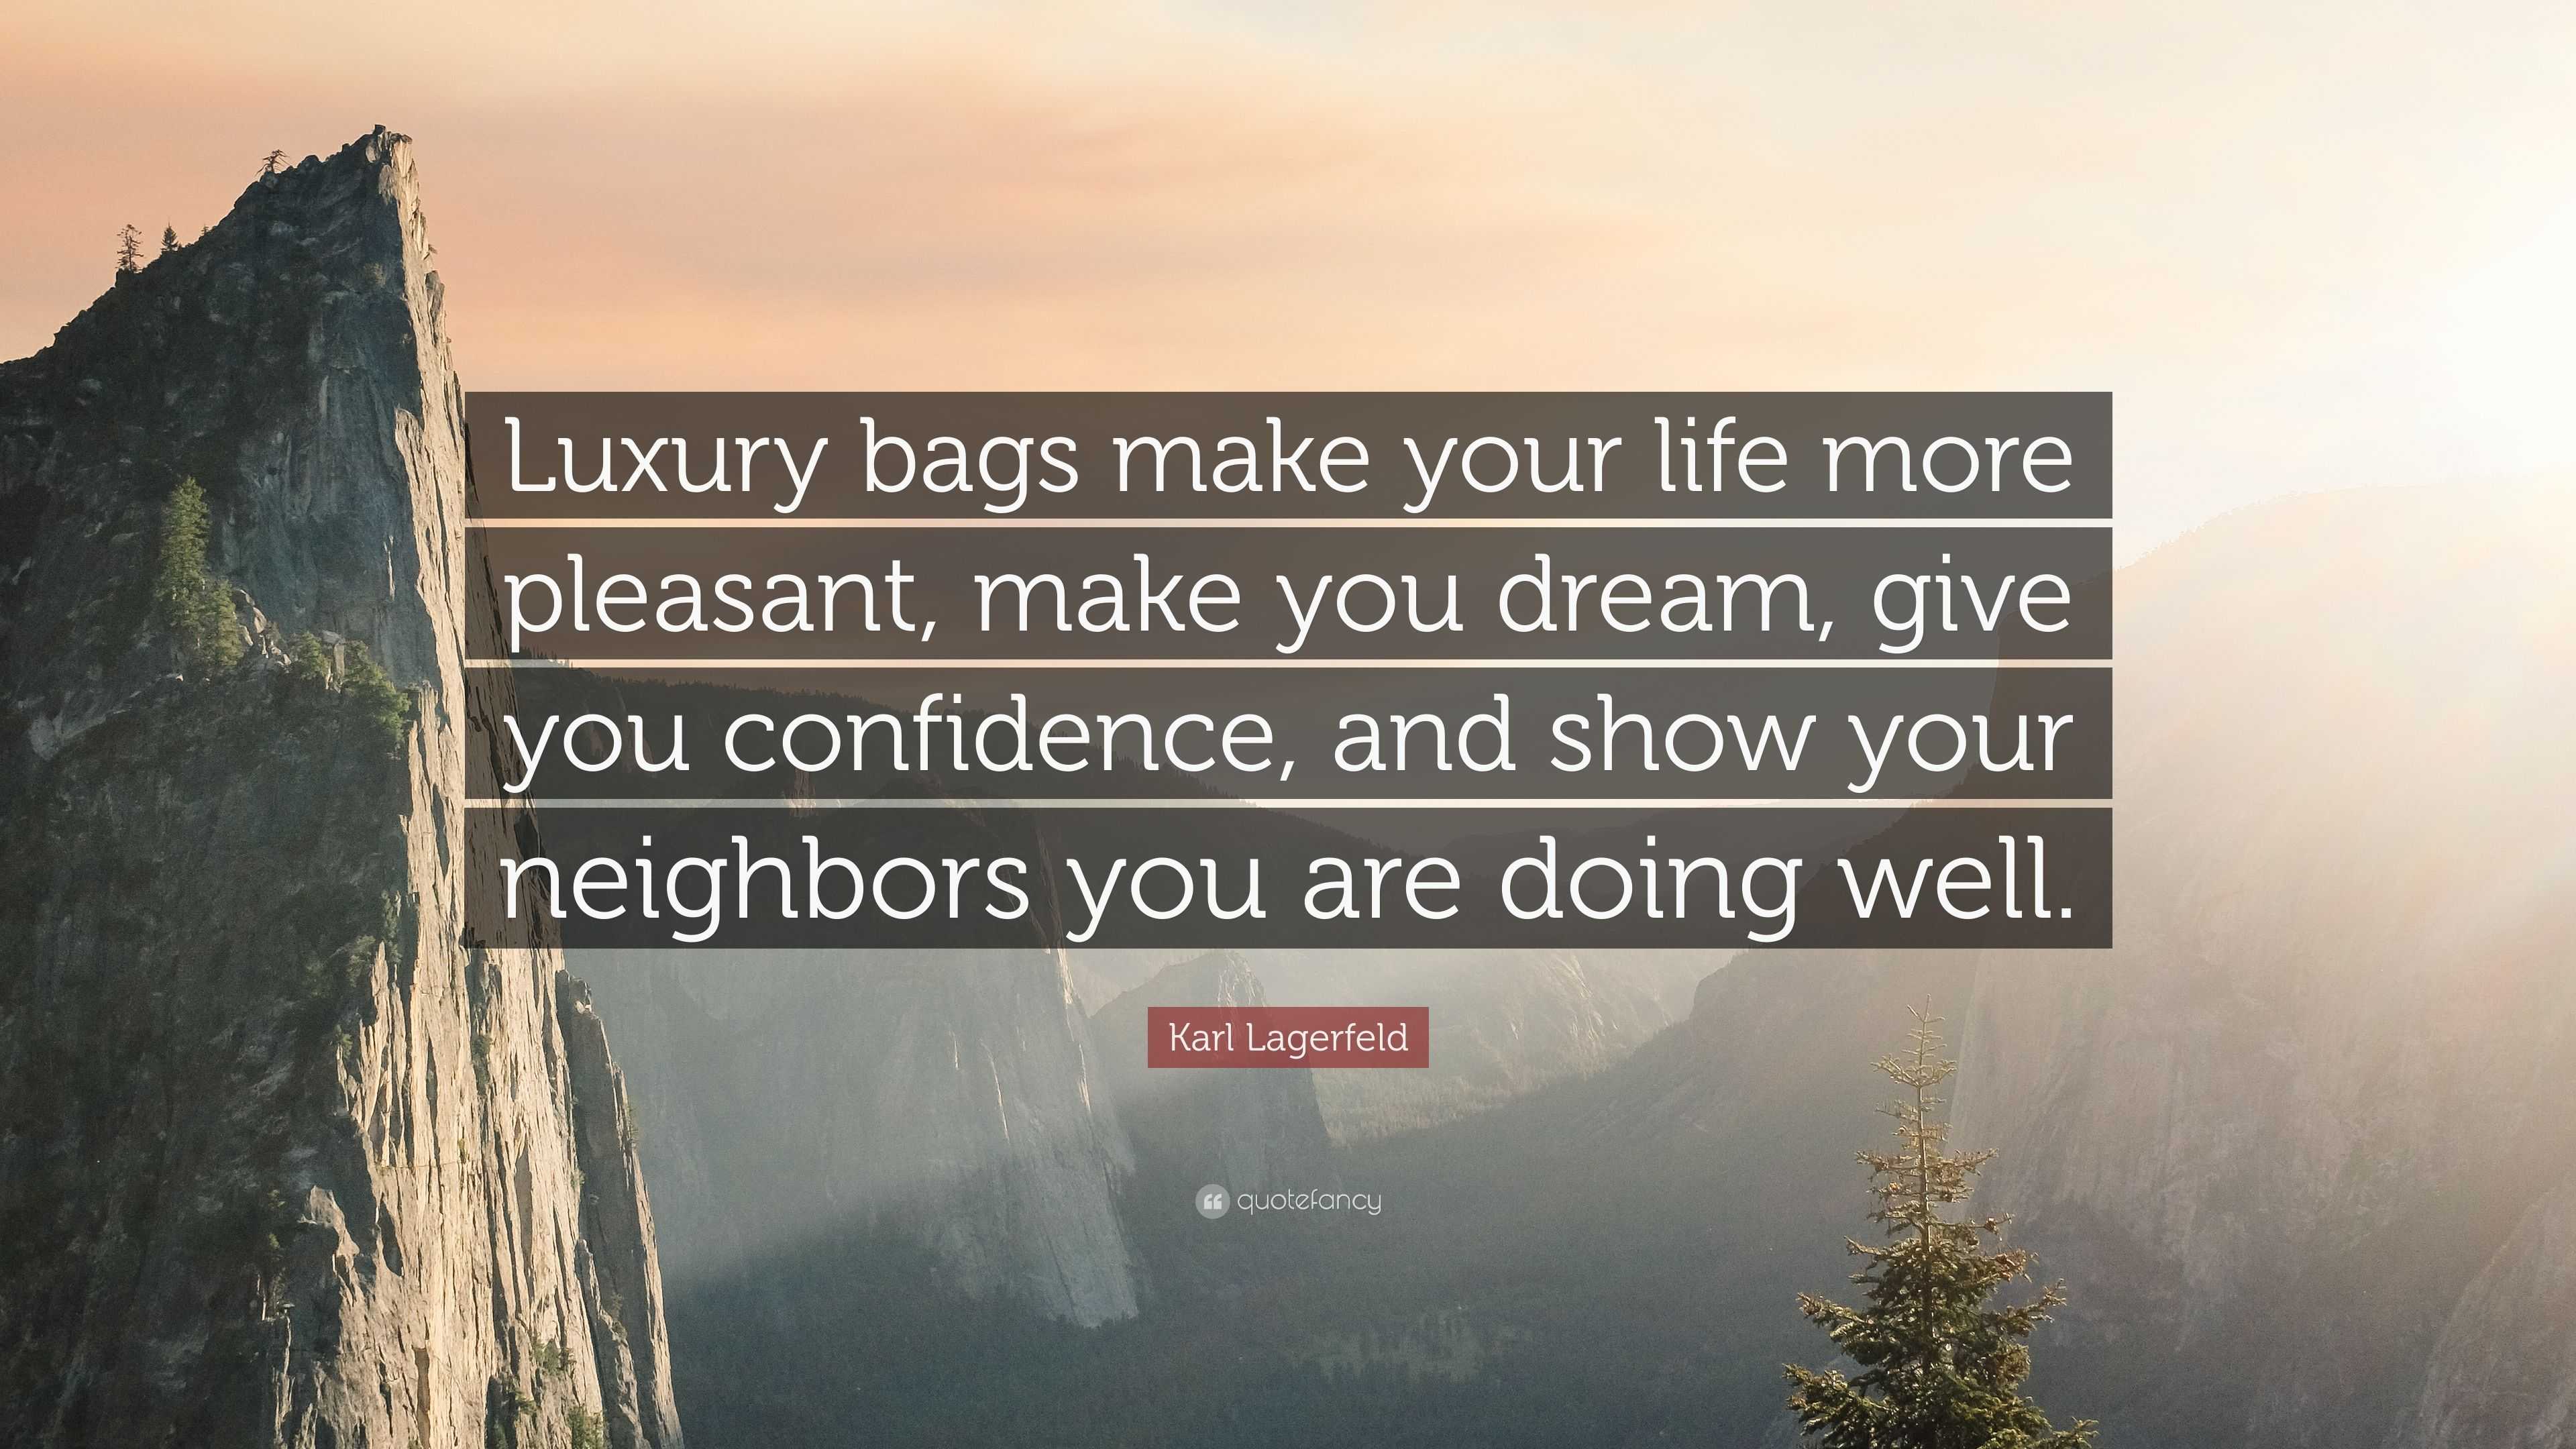 Karl Lagerfeld Quote: “Luxury bags make your life more pleasant, make you  dream, give you confidence, and show your neighbors you are doing wel”